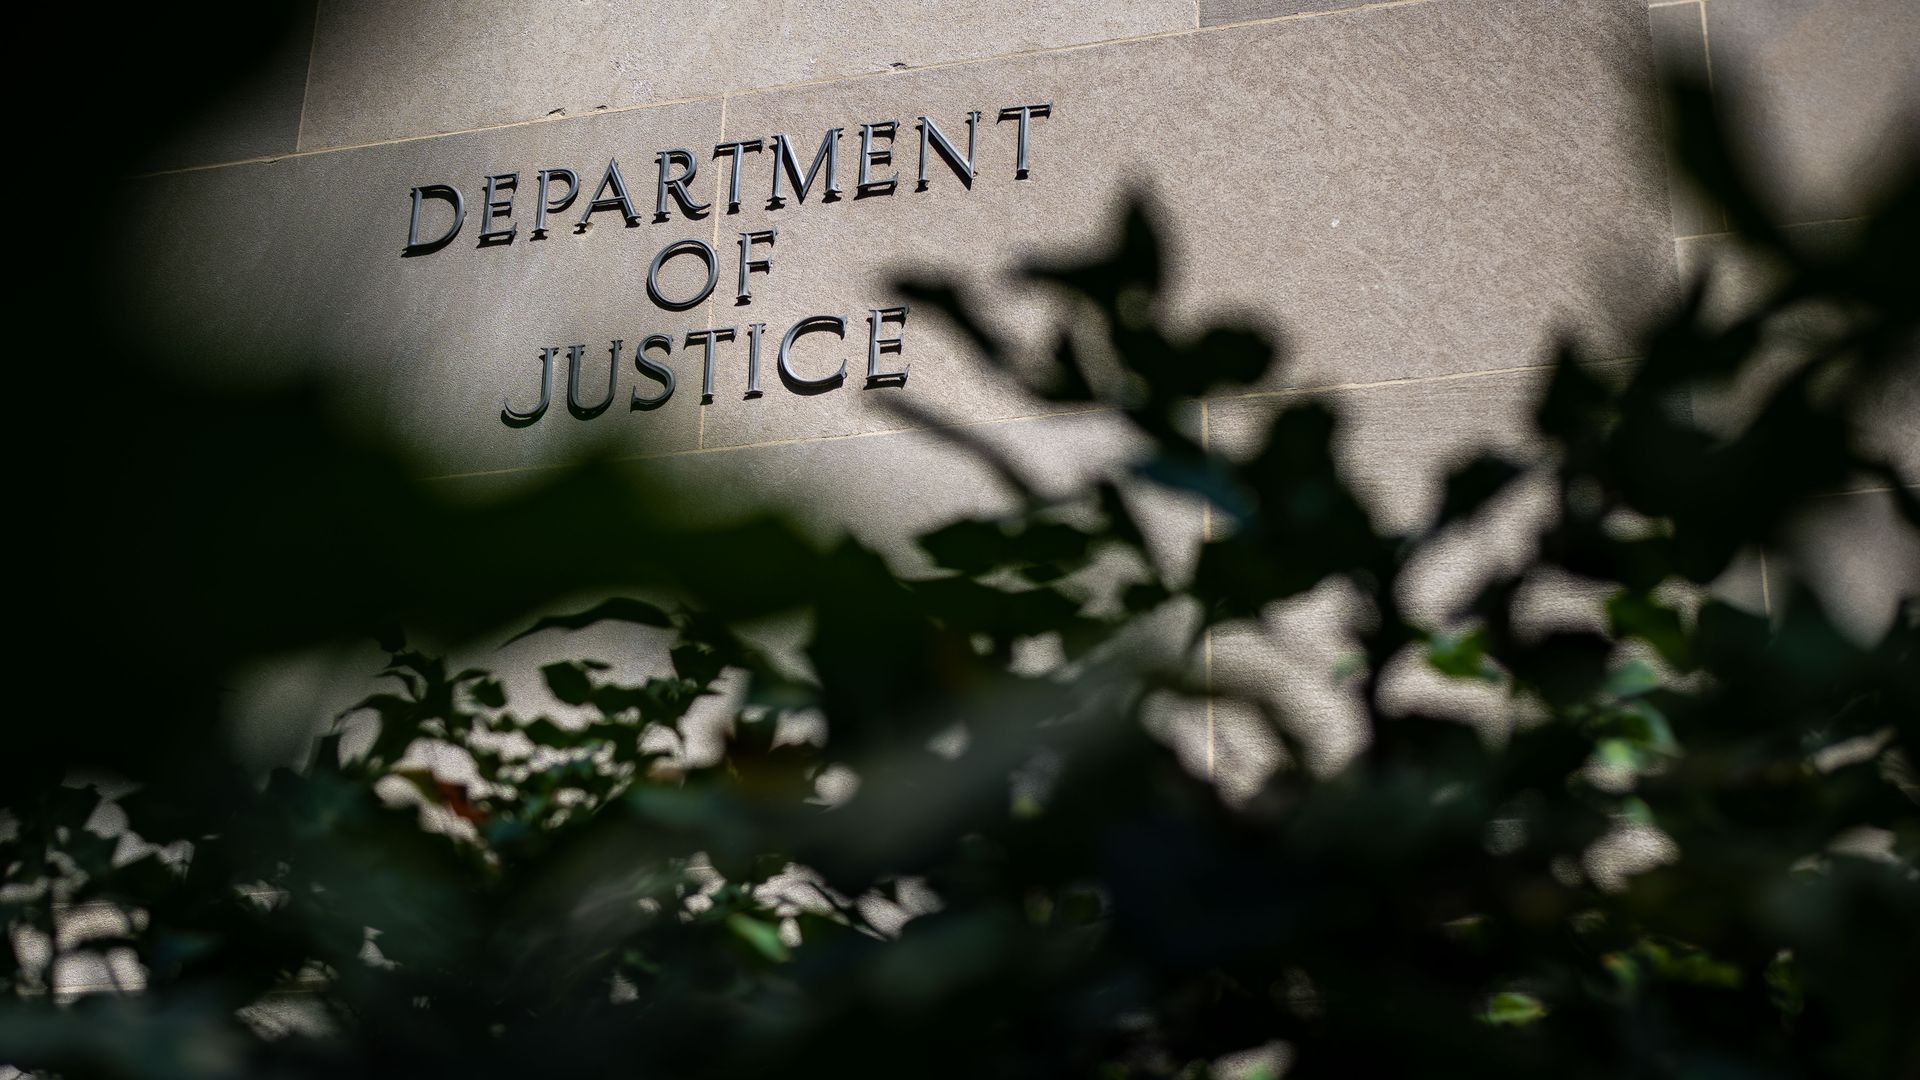 Picture of Department of Justice sign